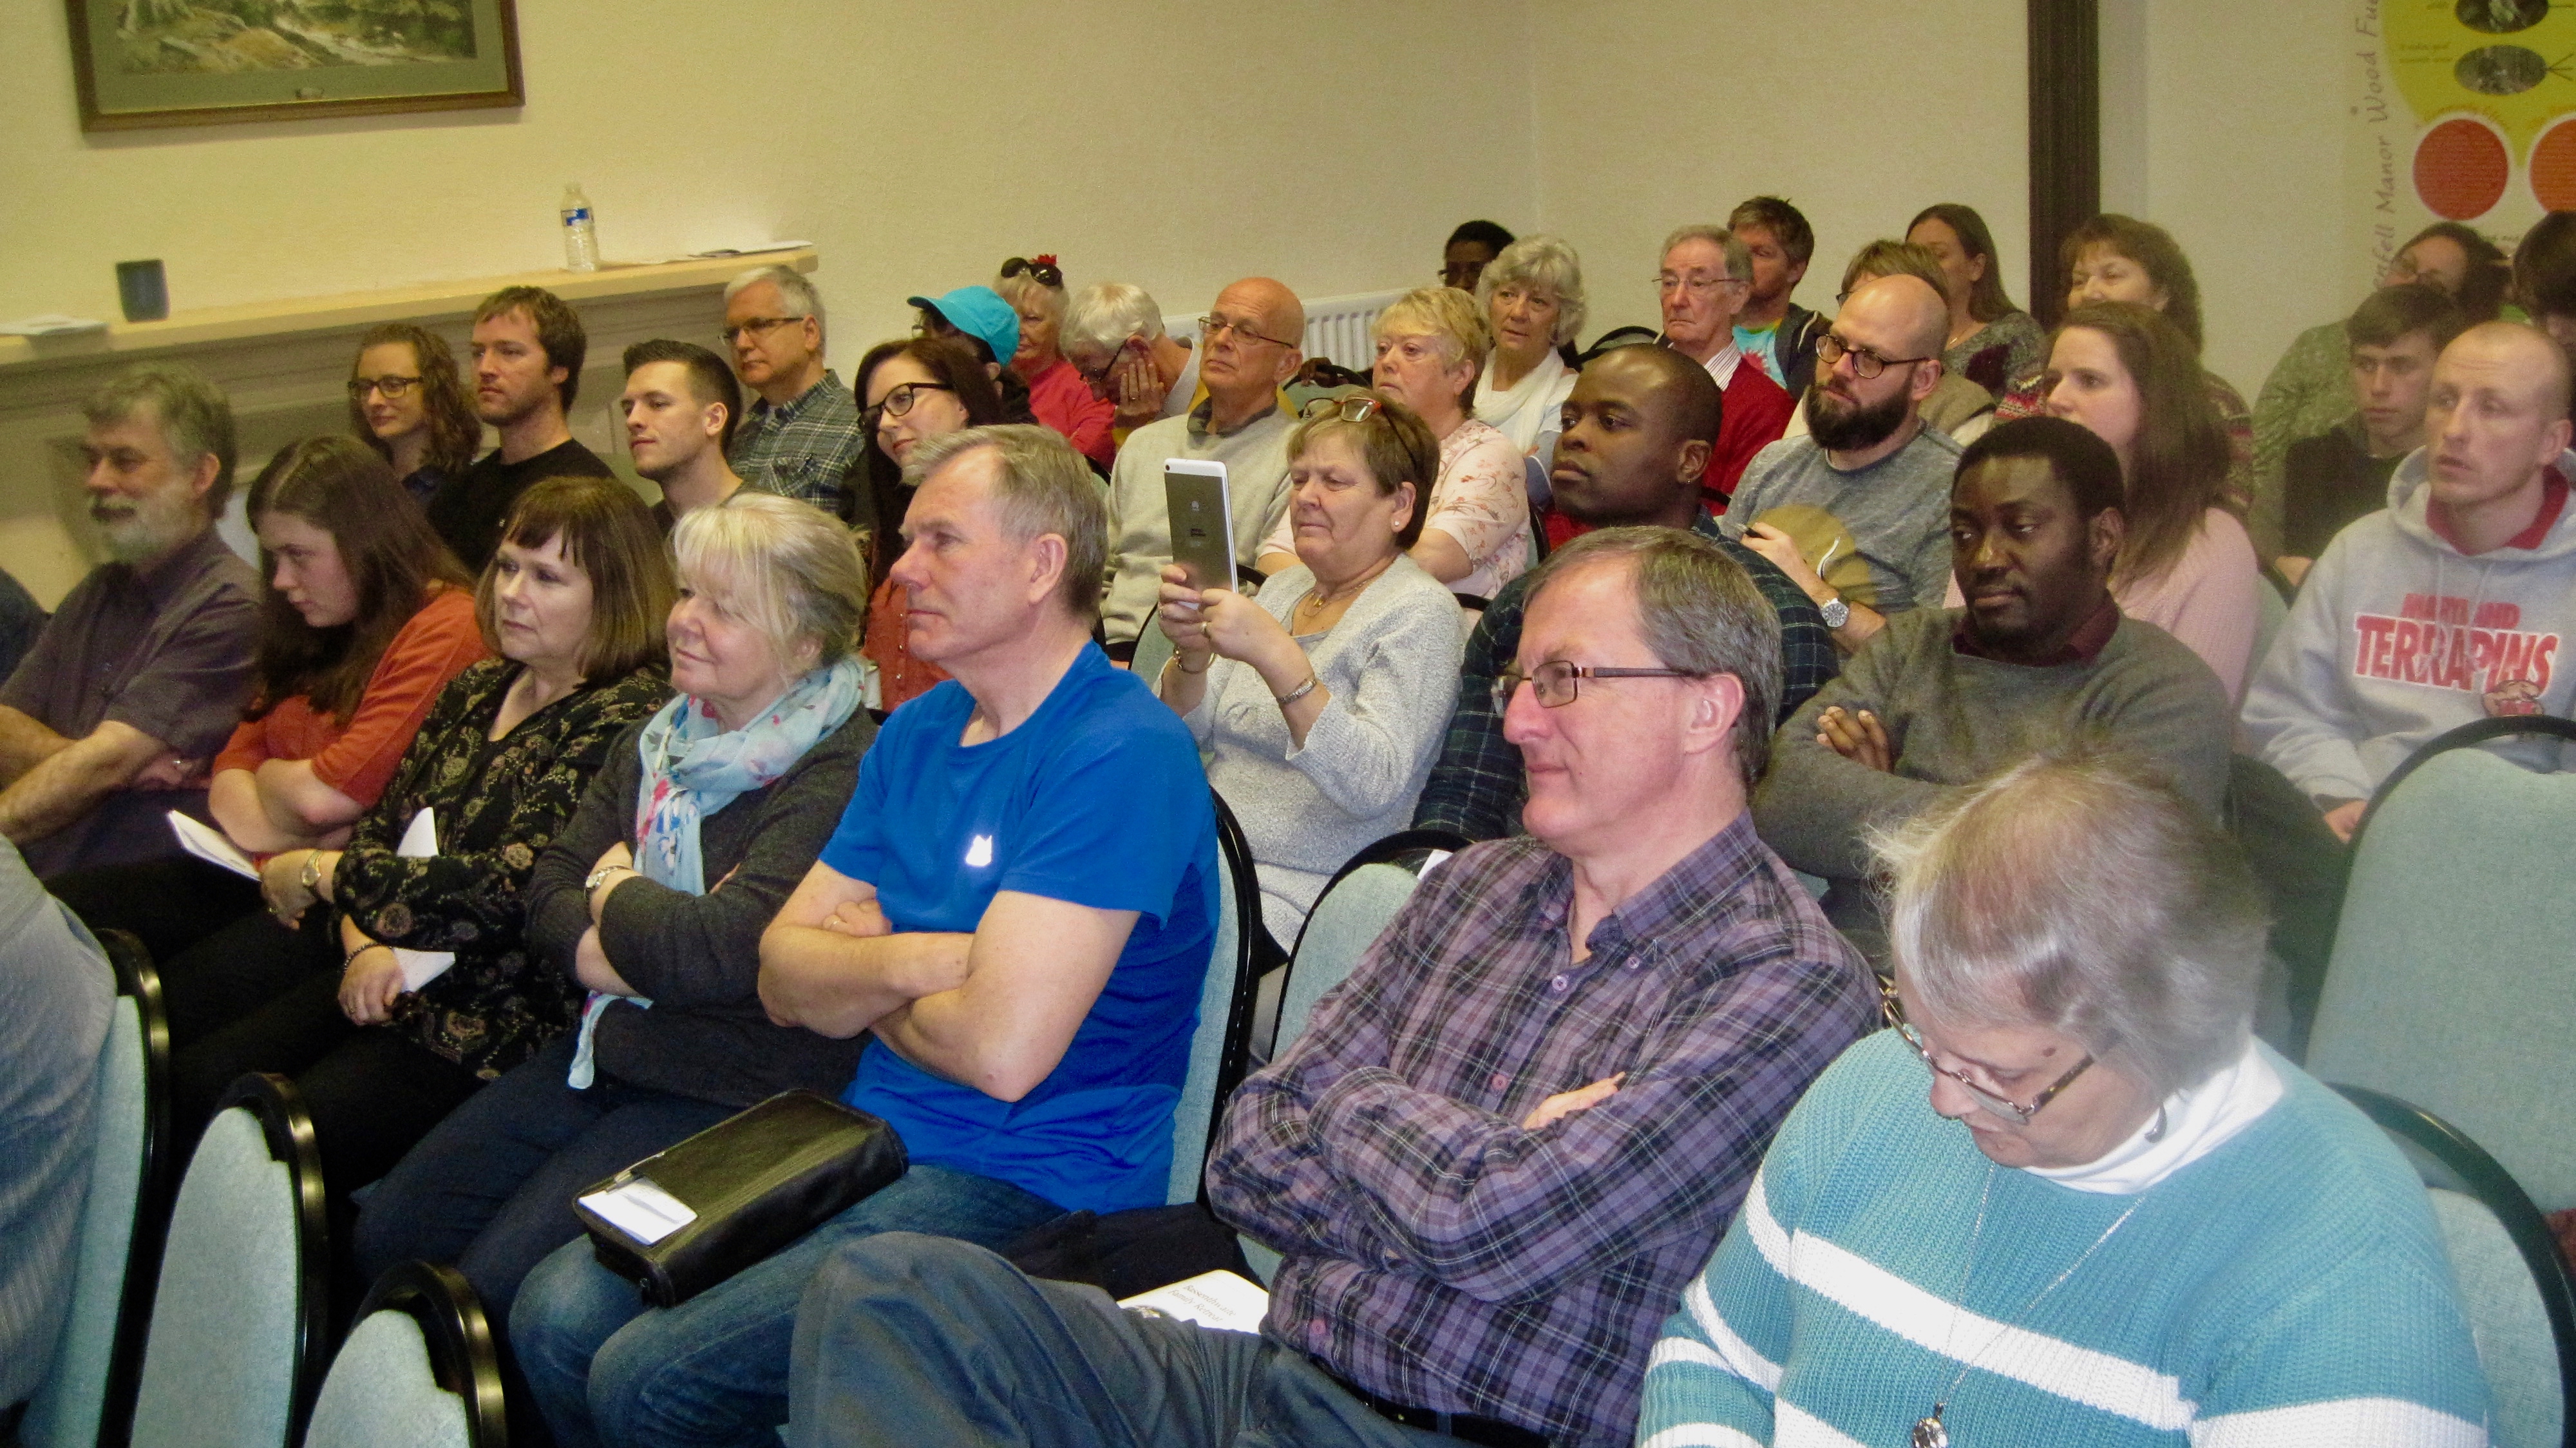 The attentive crowd during one of the more 'formal' sessions at the retreat